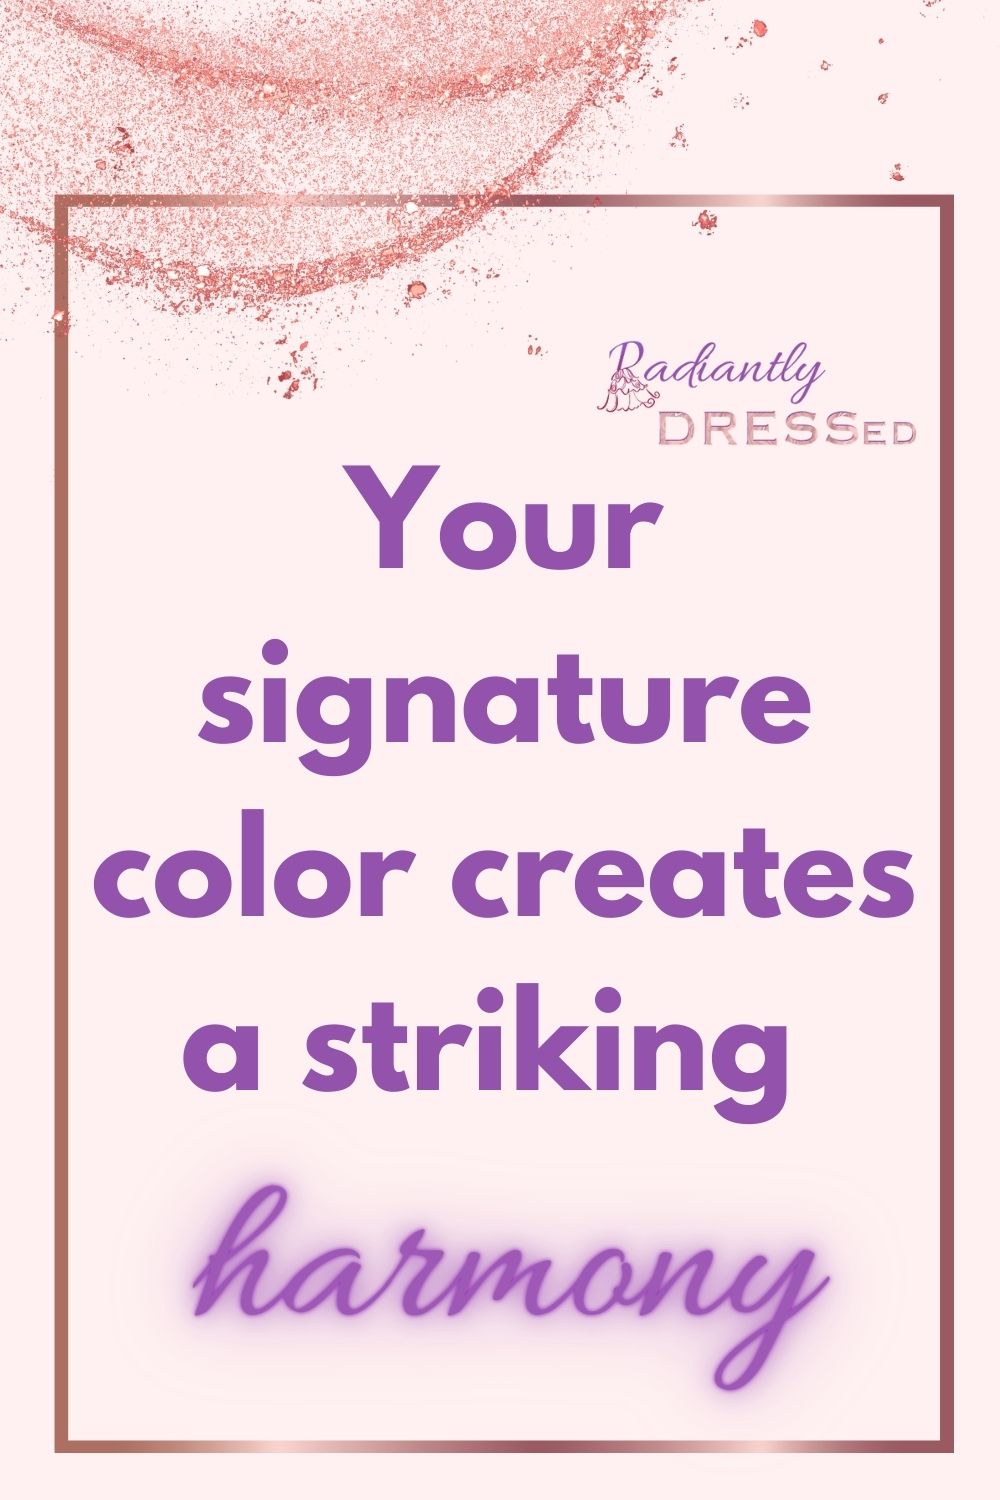 your signature color creates a striking harmony on light pink background with sparkles